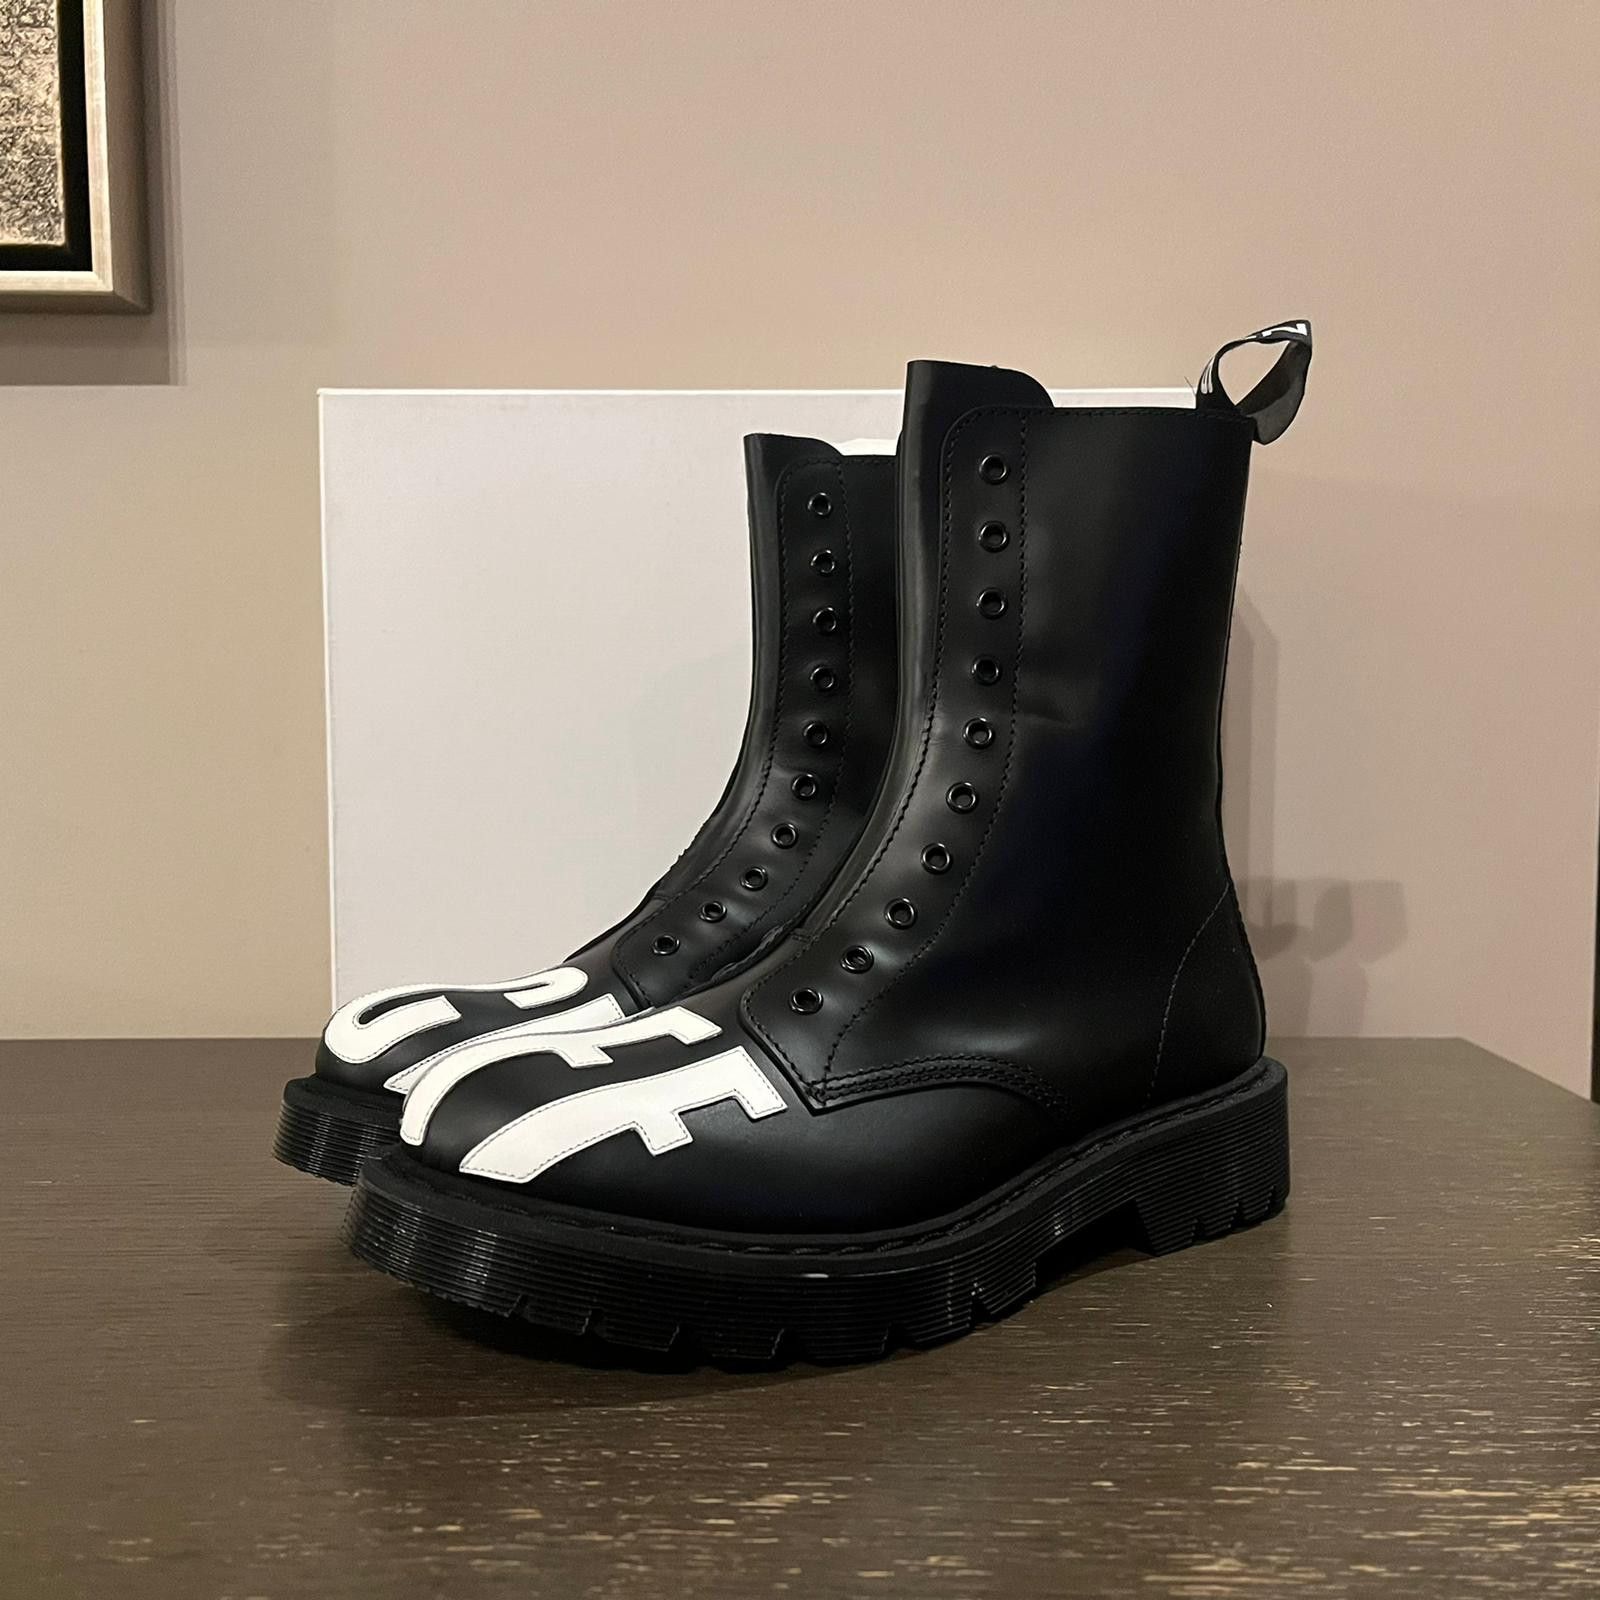 Vetements Fuck Off Army Boots in Black | Grailed